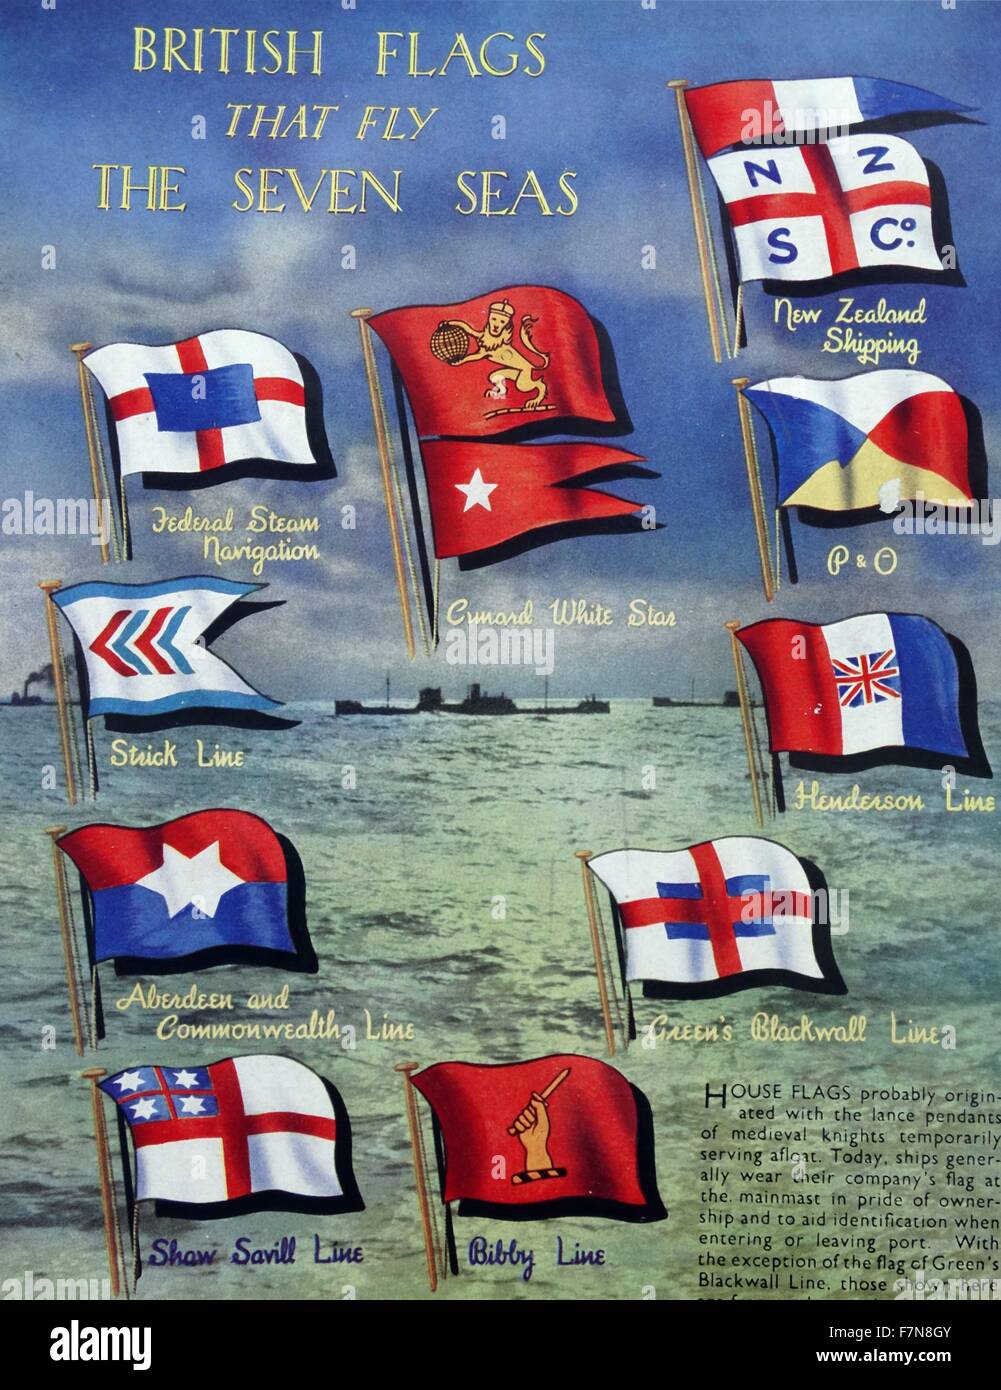 Colour poster depicting the British Flags that fly the Seven Seas. Centre to right: Cunard White Star; New Zealand Shipping; P&O; Henderson Line; Green Blackwall Line; Bibby Line; Shaw Savill Line; Aberdeen and Commonwealth Line; Stick Line; Federal Steam Navigation; Dated 1939 Stock Photo